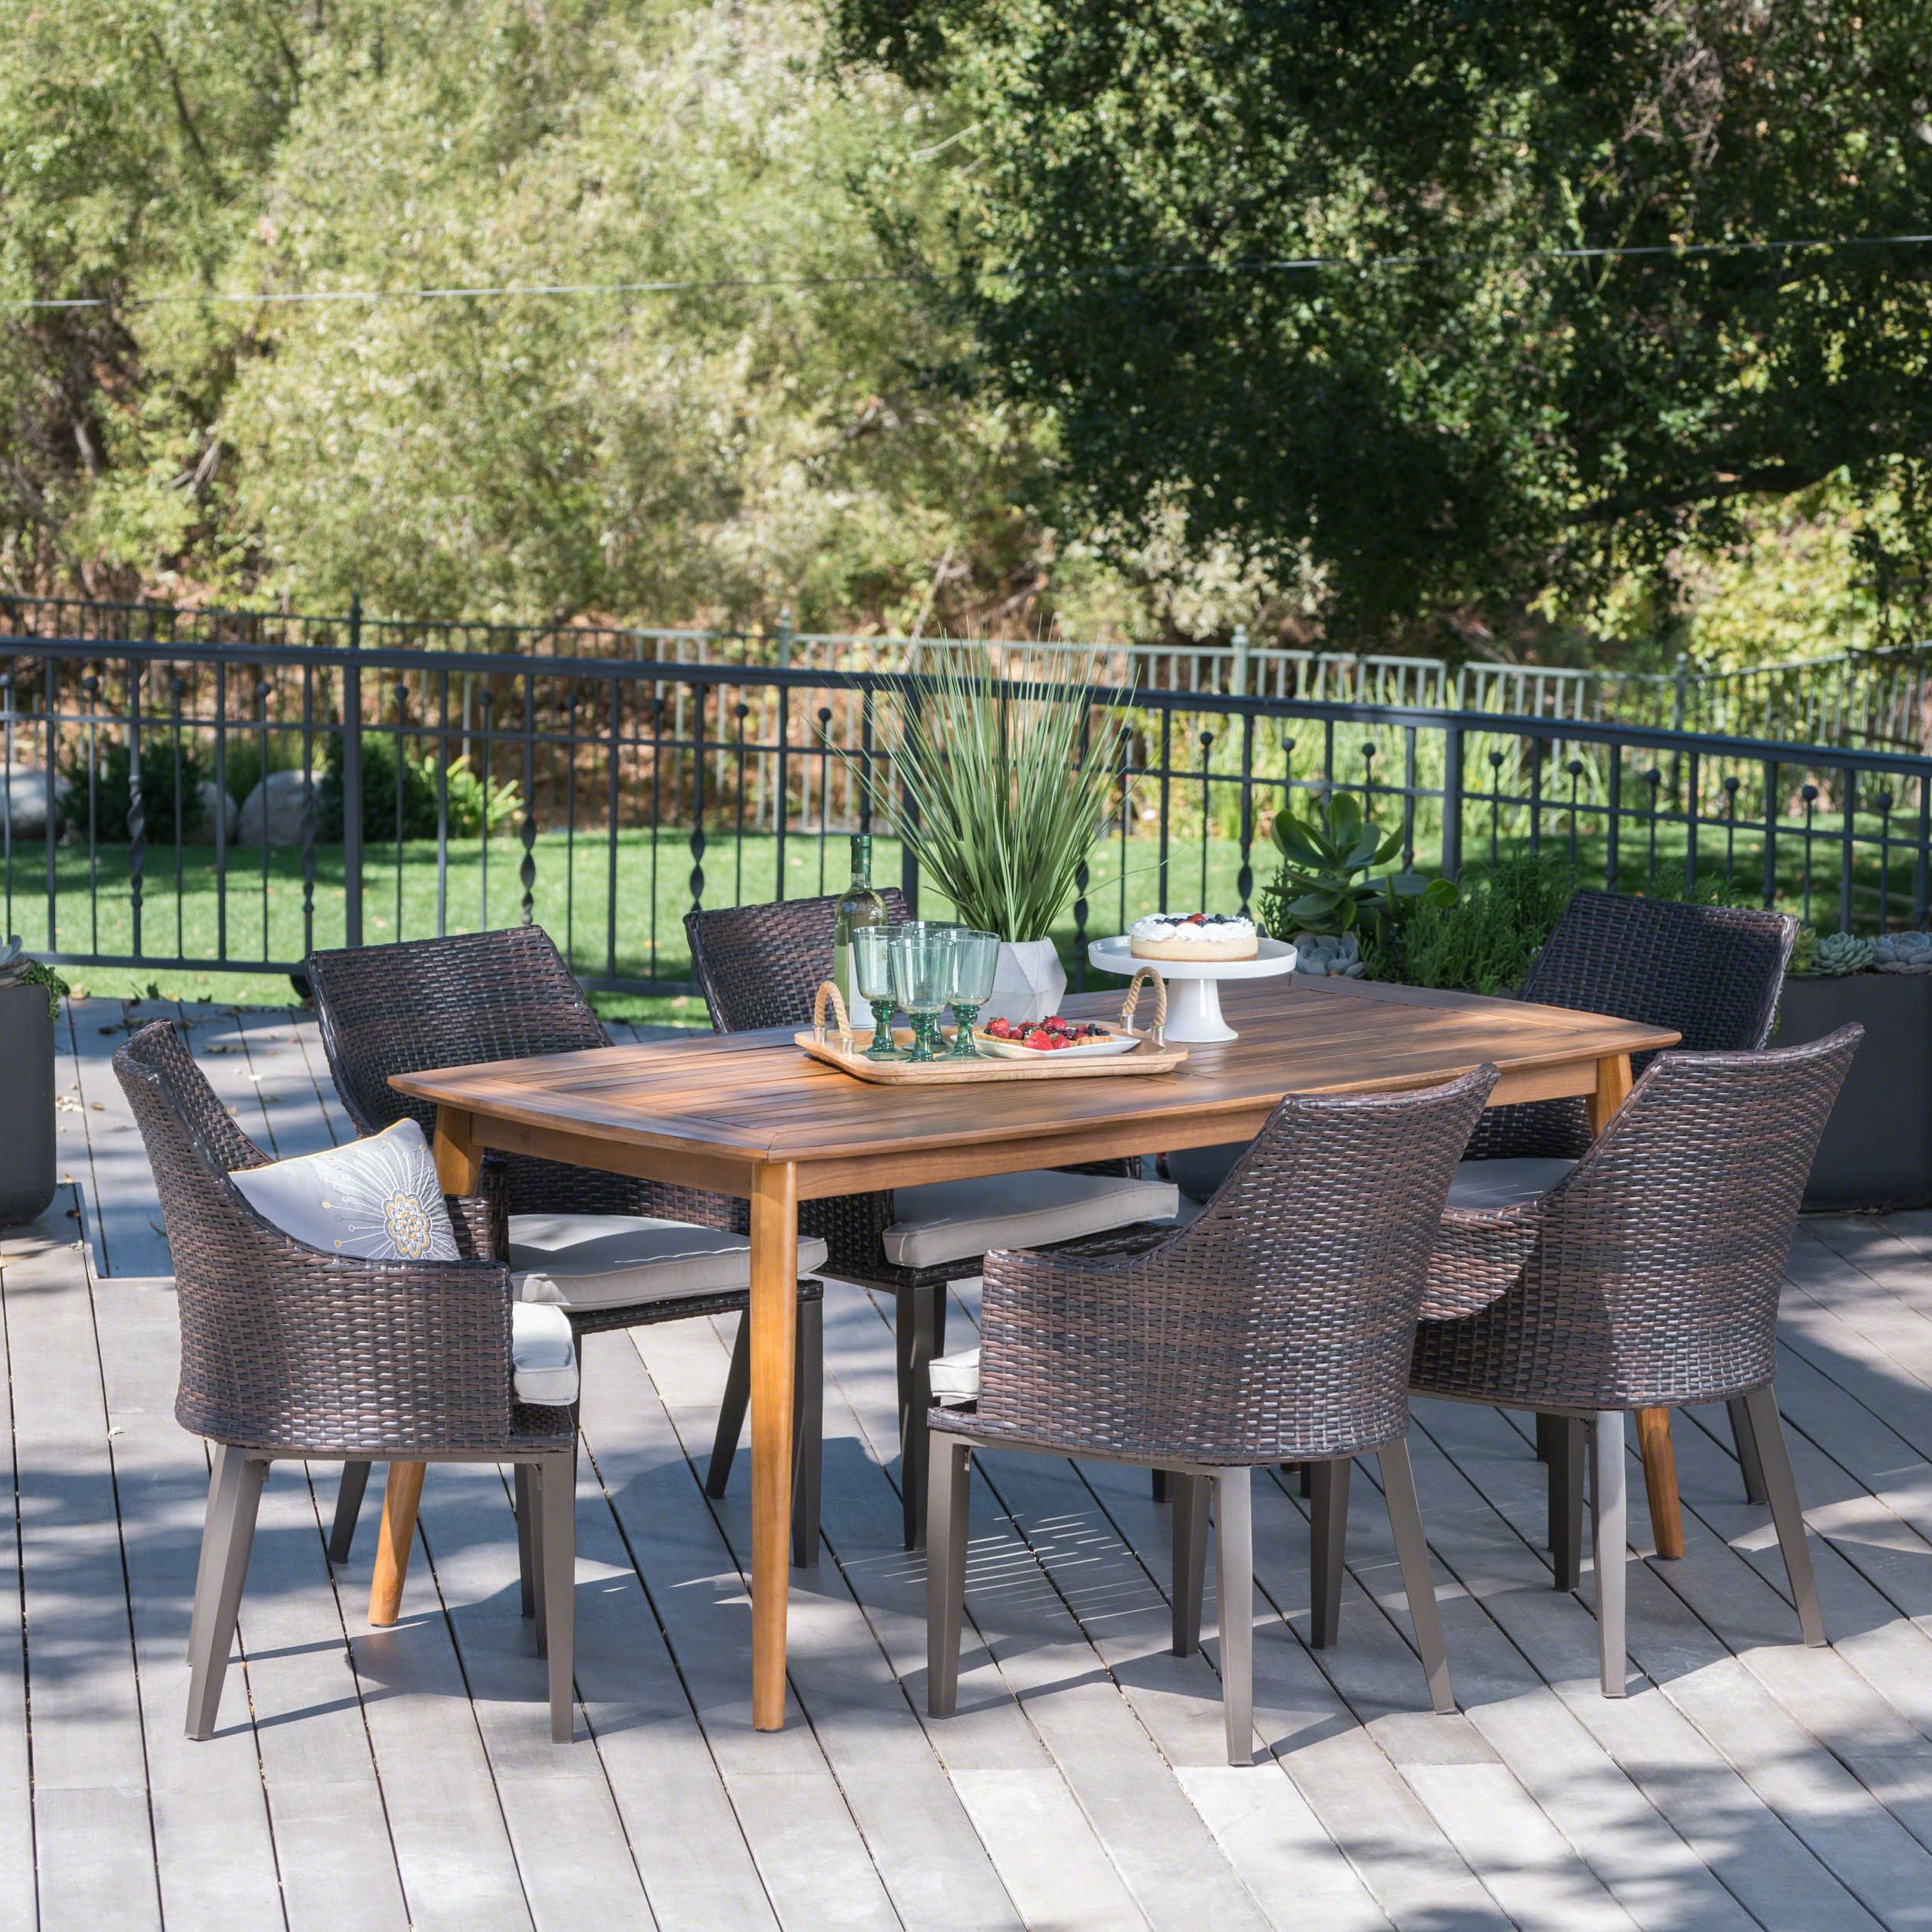 Rectangular Outdoor Patio Dining Sets With Widely Used Alexa Outdoor 7 Piece Wicker Rectangular Dining Set With Acacia Wood (View 6 of 15)